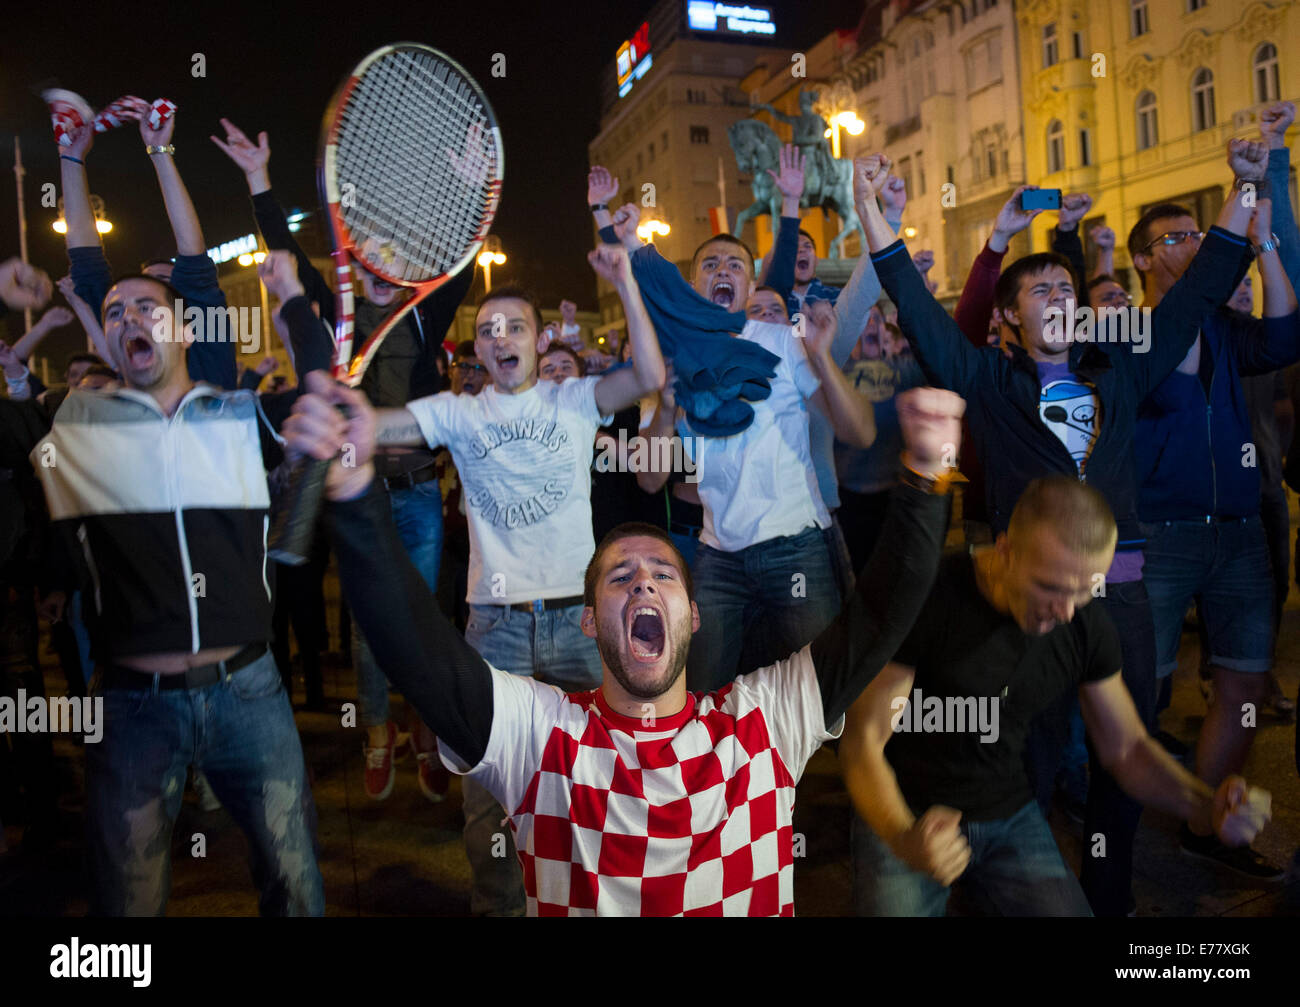 (140909) -- ZAGREB, Sept. 9, 2014 (Xinhua) -- Croatian tennis fans celebrate while watching the televised US Open final match between Marin Cilic of Croatia and Kai Nishikori of Japan in Zagreb, Croatia, Sept. 9, 2014. Thousands of fans watched the match on a big screen at Zagreb's central square. Cilic won his first Grand Slam tournament. (Xinhua/Miso Lisanin) Stock Photo